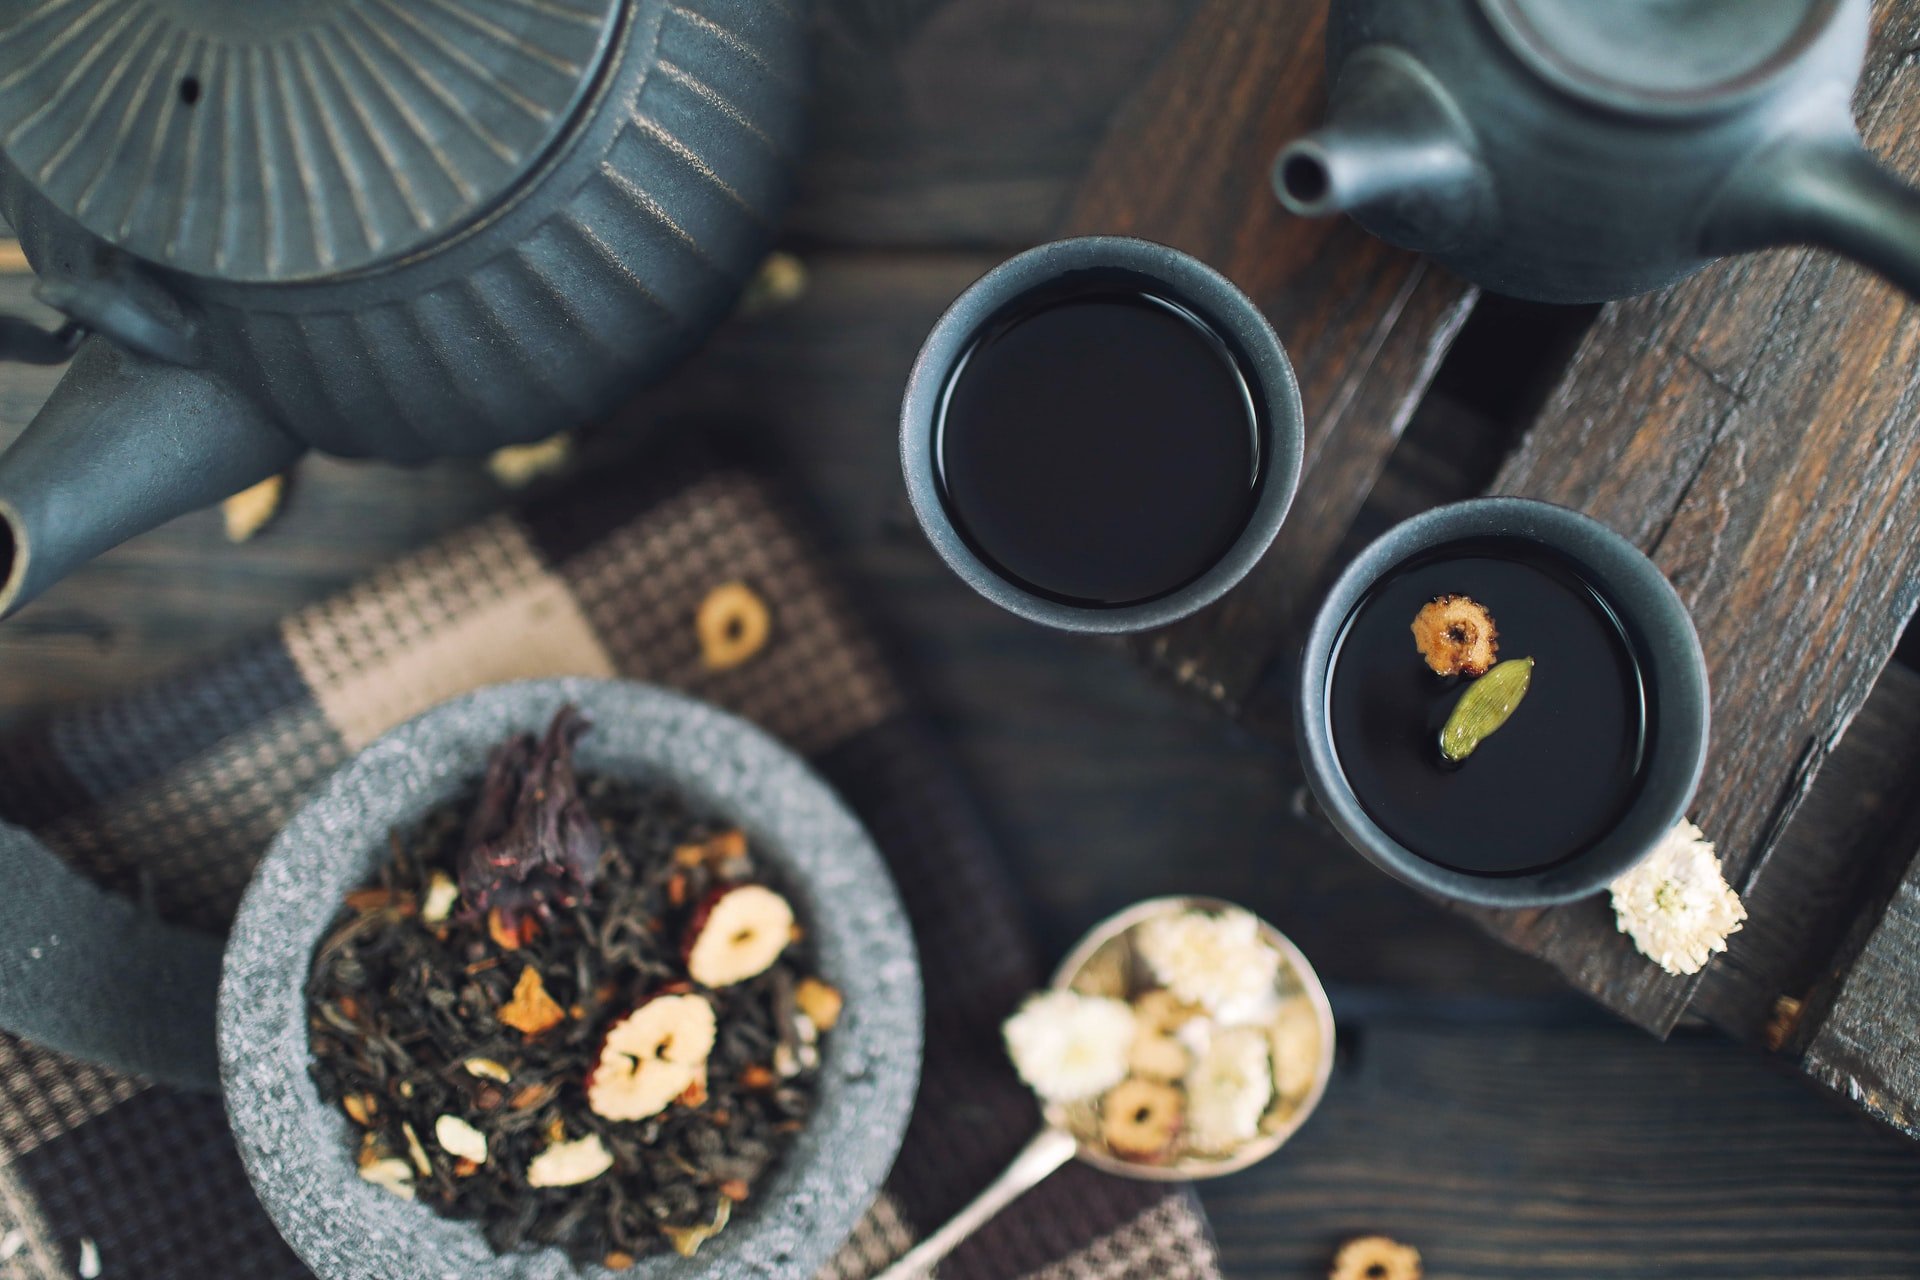 5 Chinese Herbs To Boost Your Health and Longevity